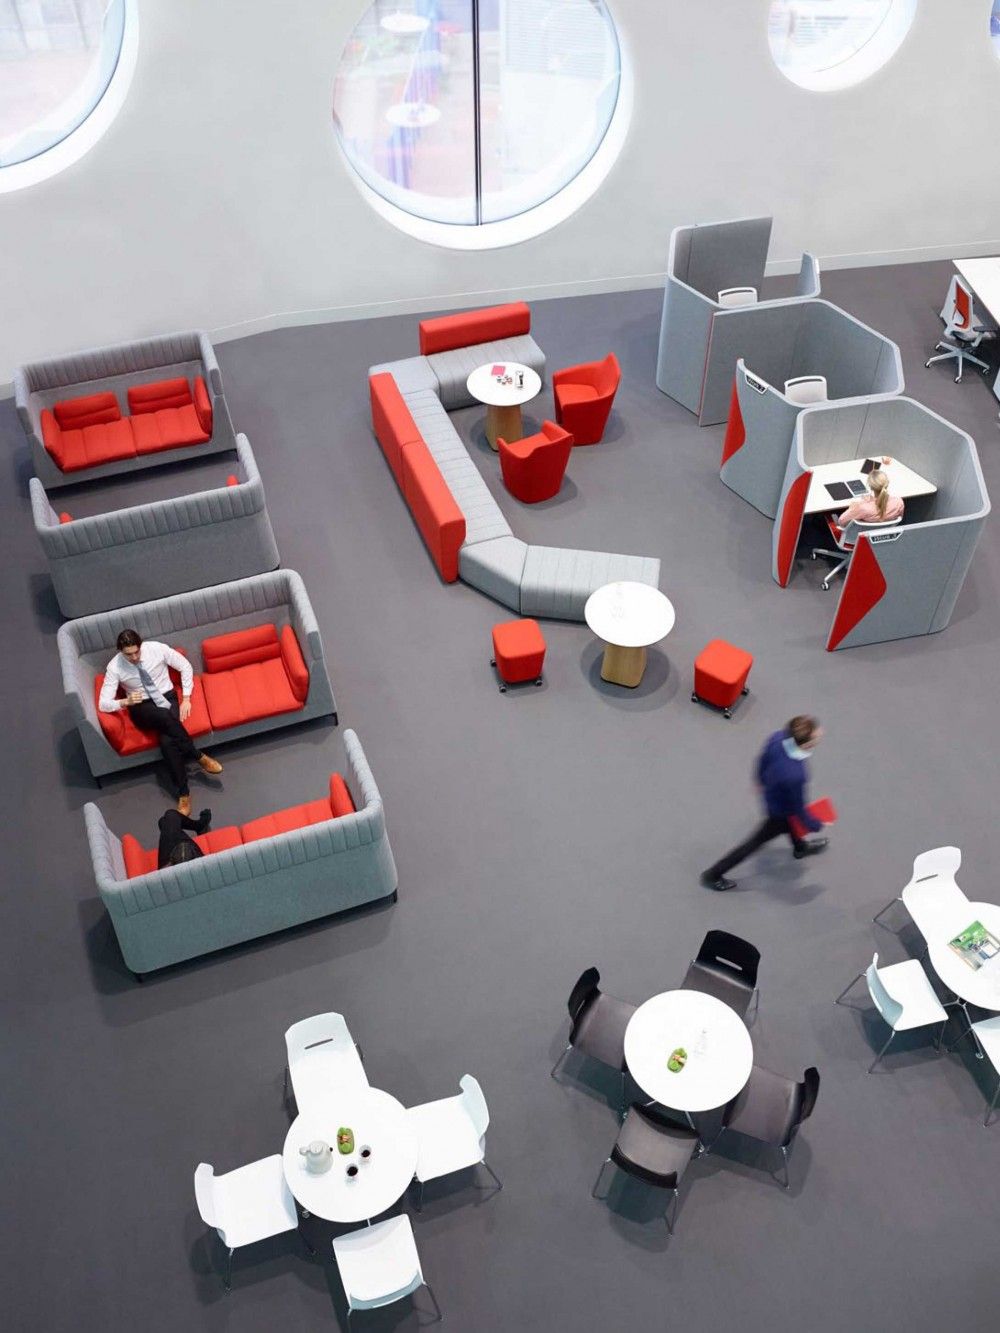 Acoustic Furniture fosters Creative Thinking in the Workplace